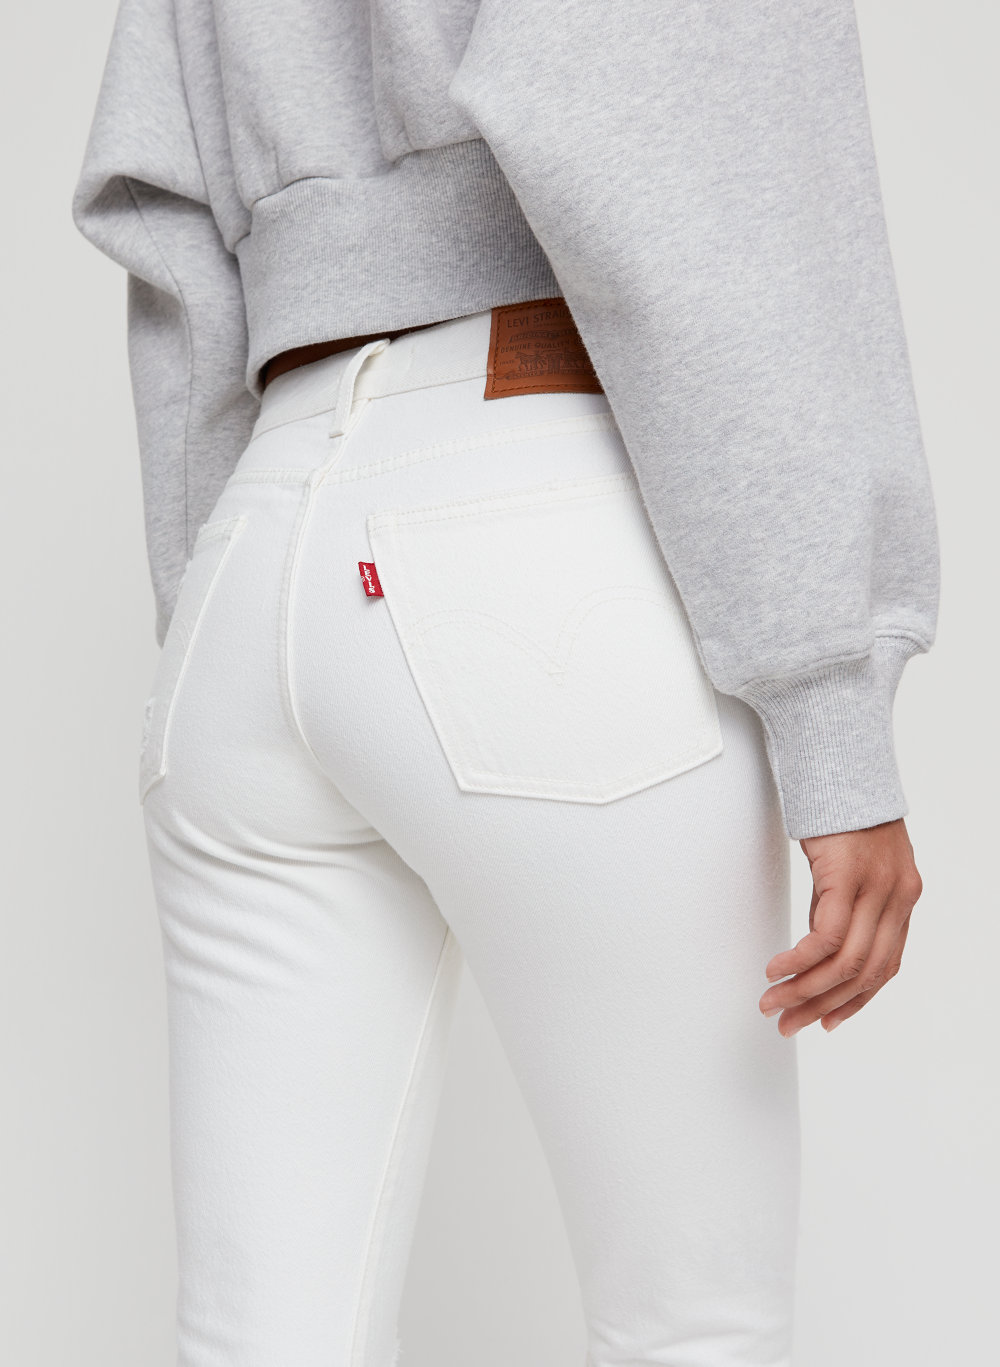 levi's wedgie white jeans